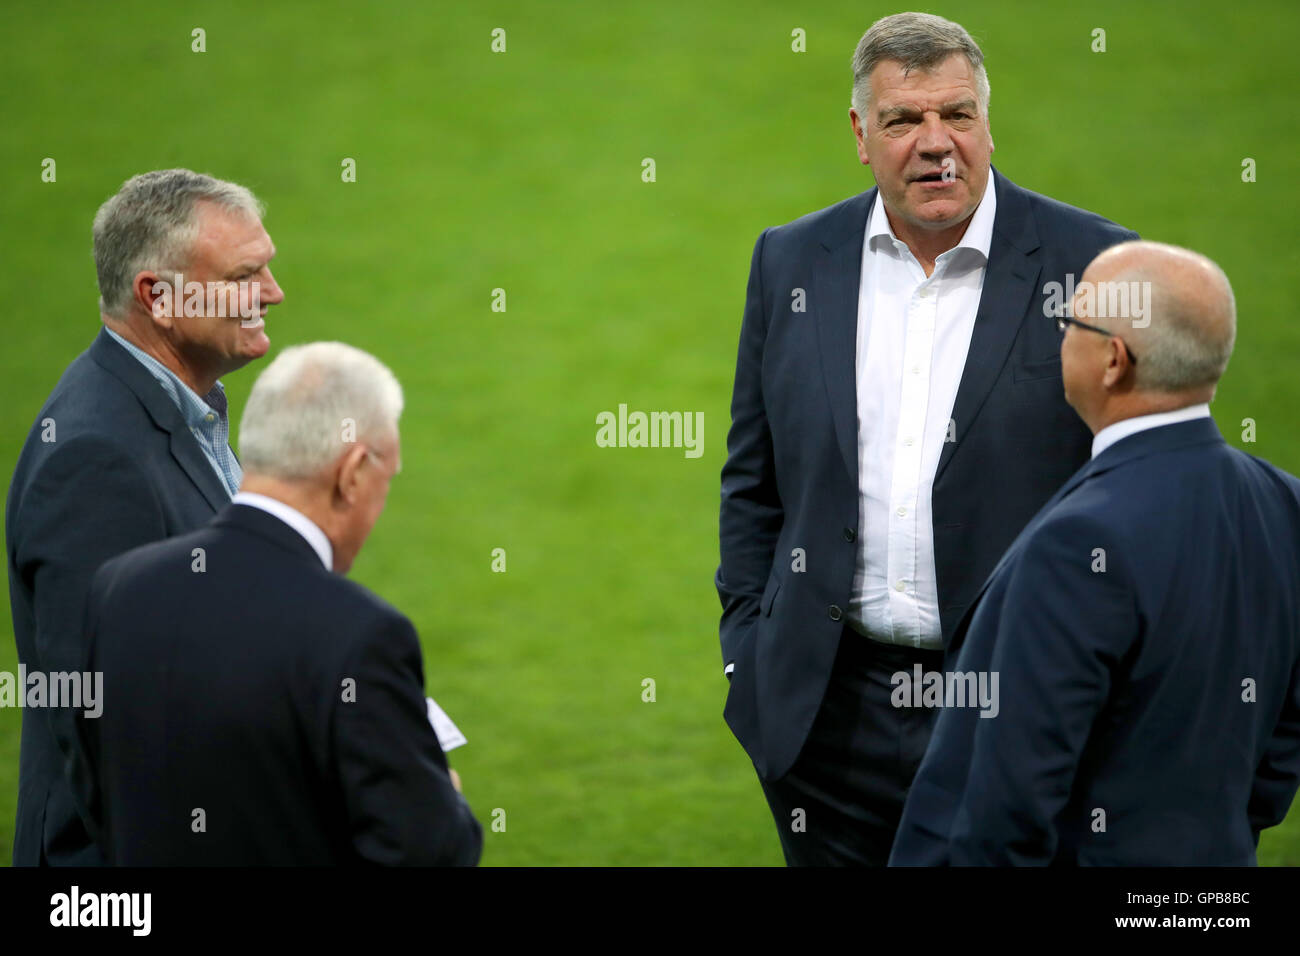 England Manager Sam Allardyce (right) during a walkaround at the City Arena, Trnava. PRESS ASSOCIATION Photo. Picture date: Saturday September 3, 2016. See PA story SOCCER England. Photo credit should read: Nick Potts/PA Wire. Stock Photo